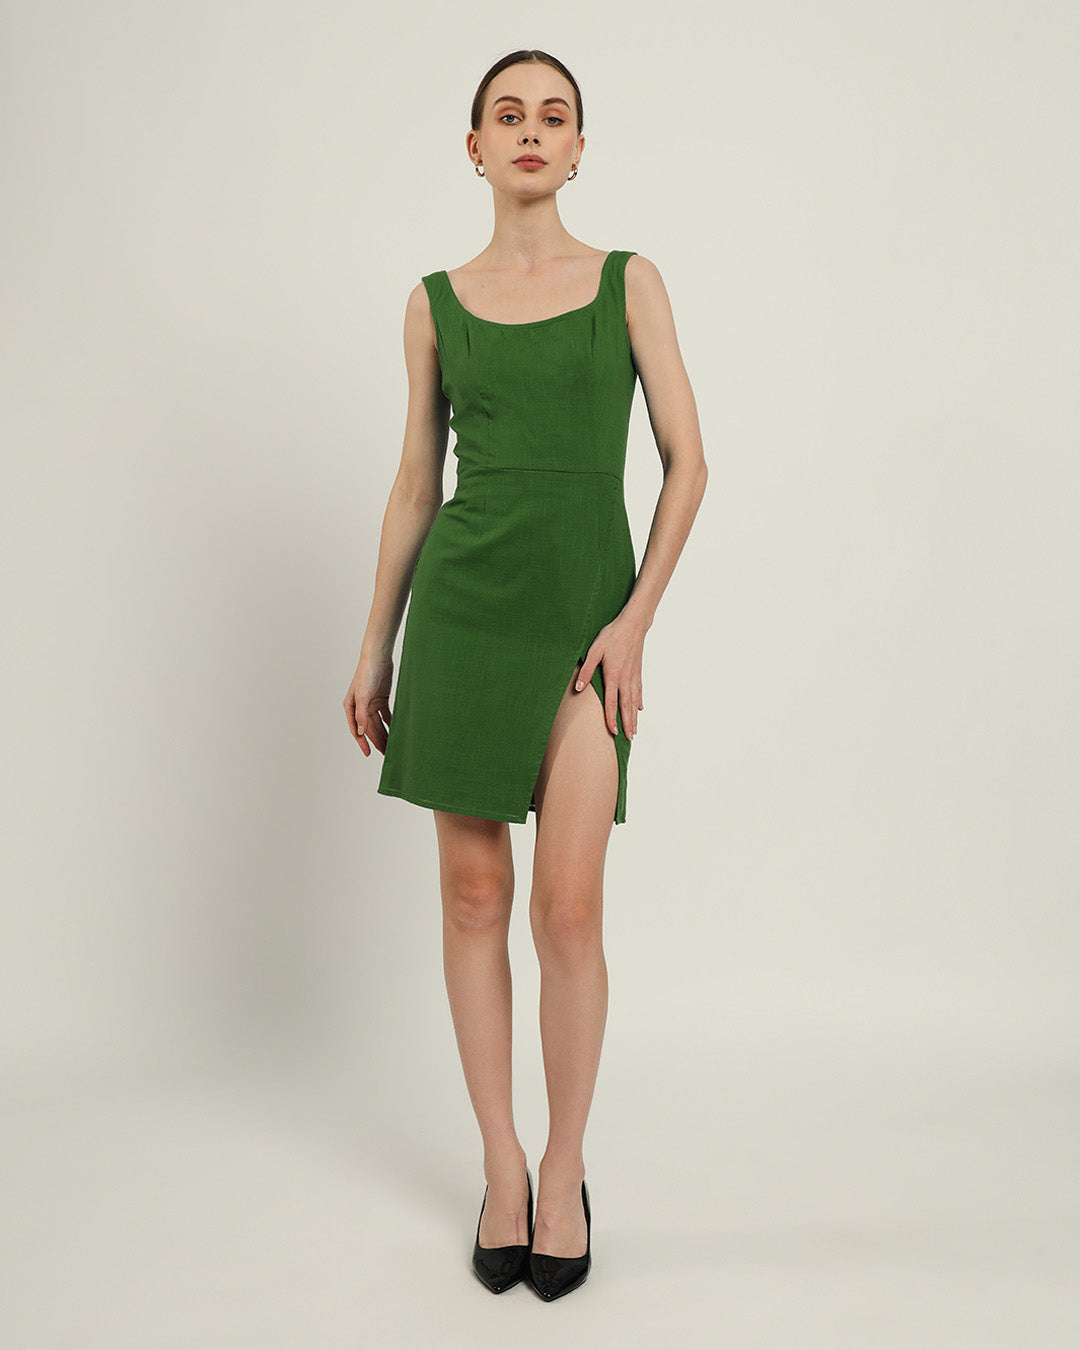 The Cannes Emerald Dress